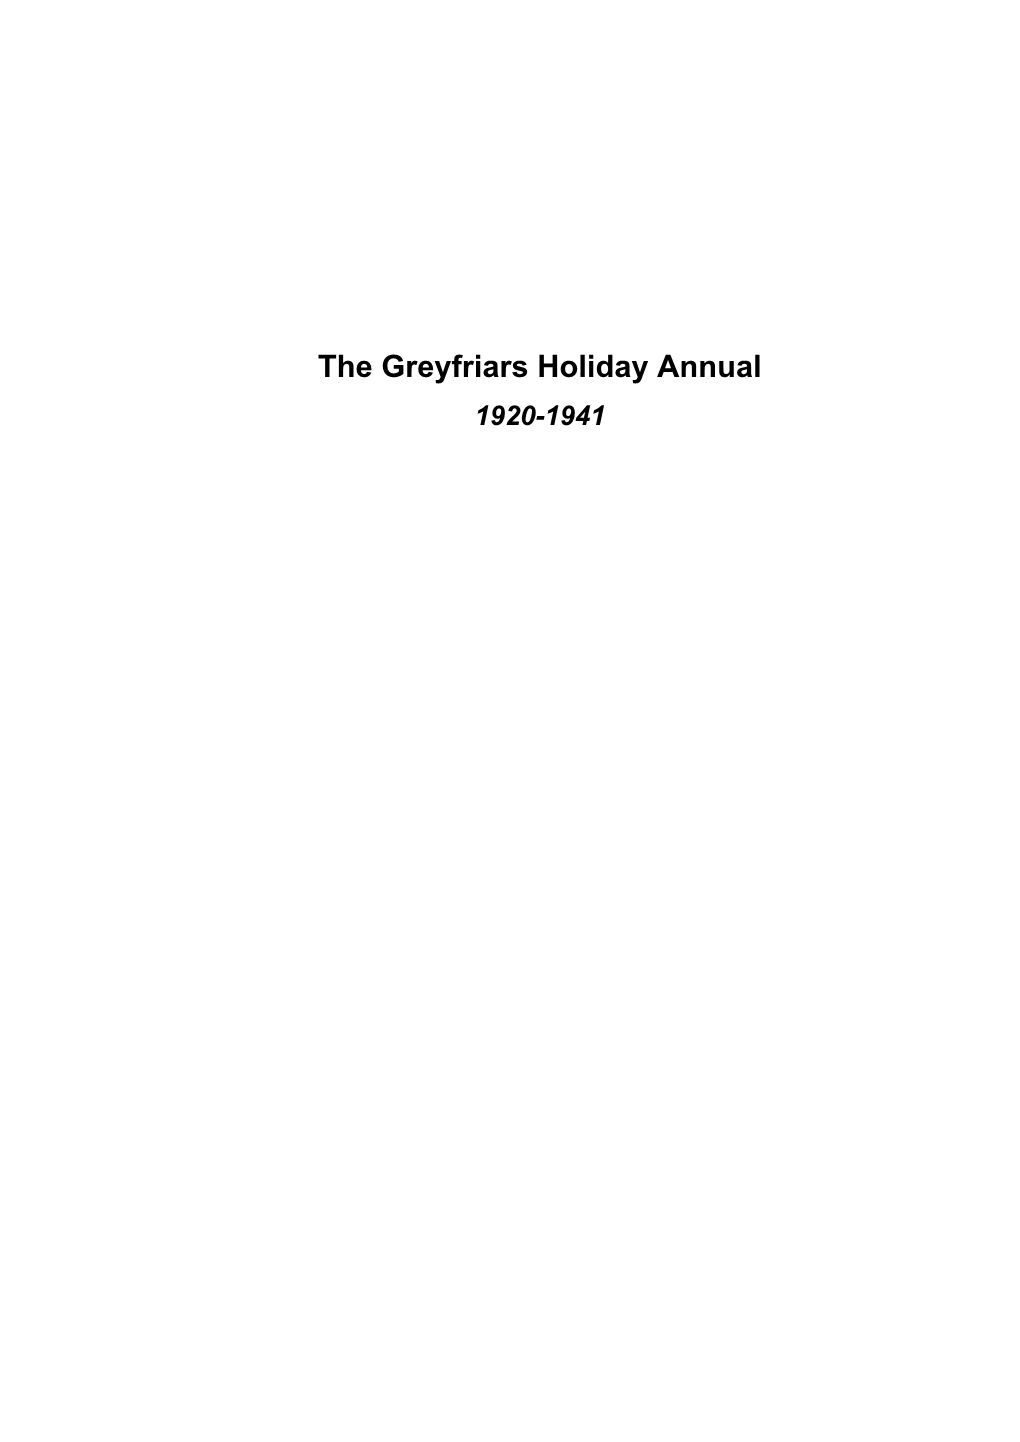 The Greyfriars Holiday Annual